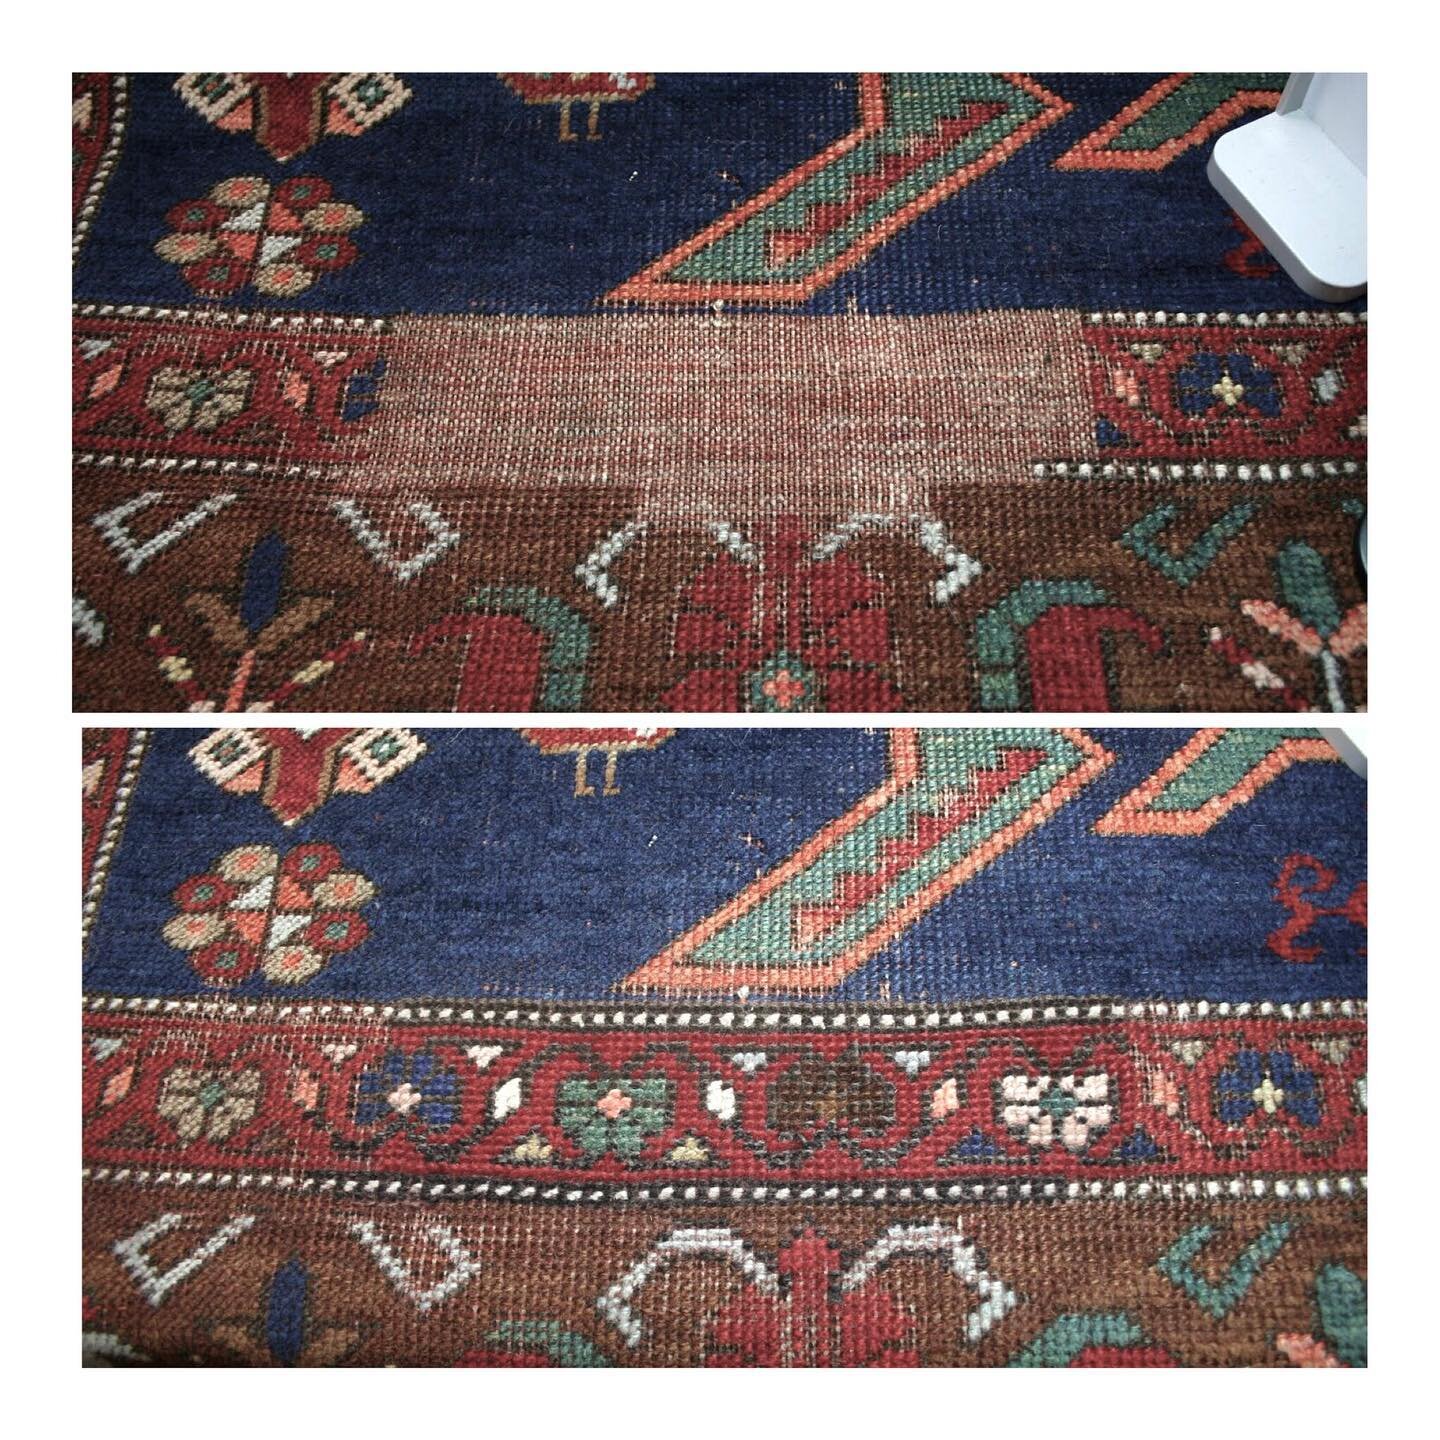 Restoration and cleaning of oriental and Navajo rugs and textiles. Reknotting an old caucasian rug, work by Liz Stevens. #orientalrugrepair #santafe #albuquerque #rugexperts